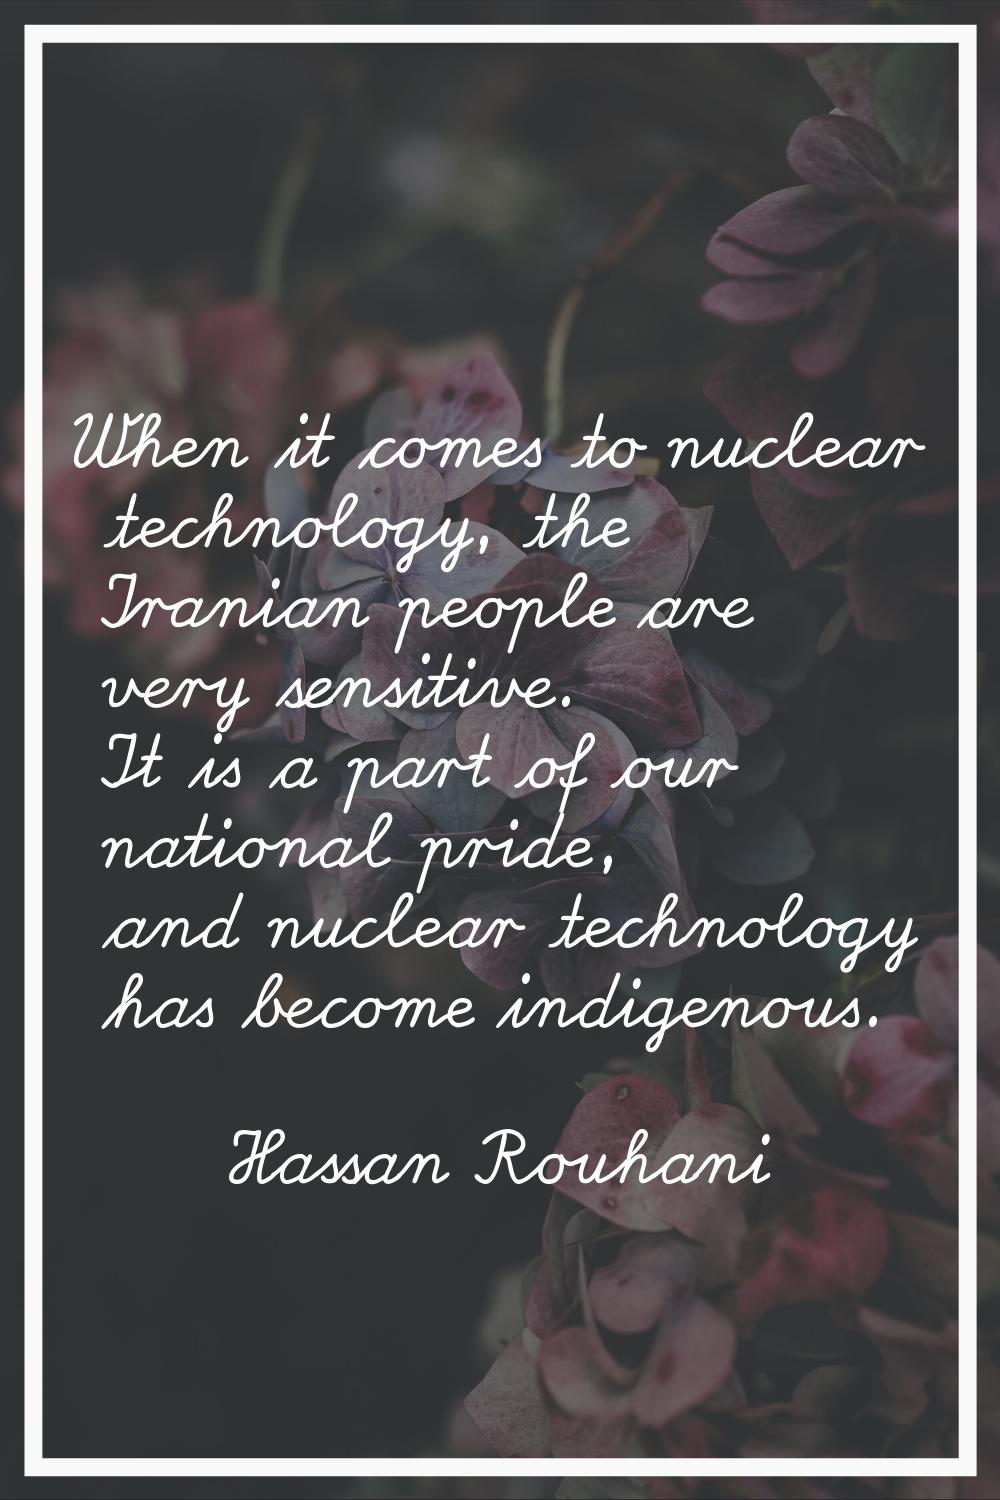 When it comes to nuclear technology, the Iranian people are very sensitive. It is a part of our nat